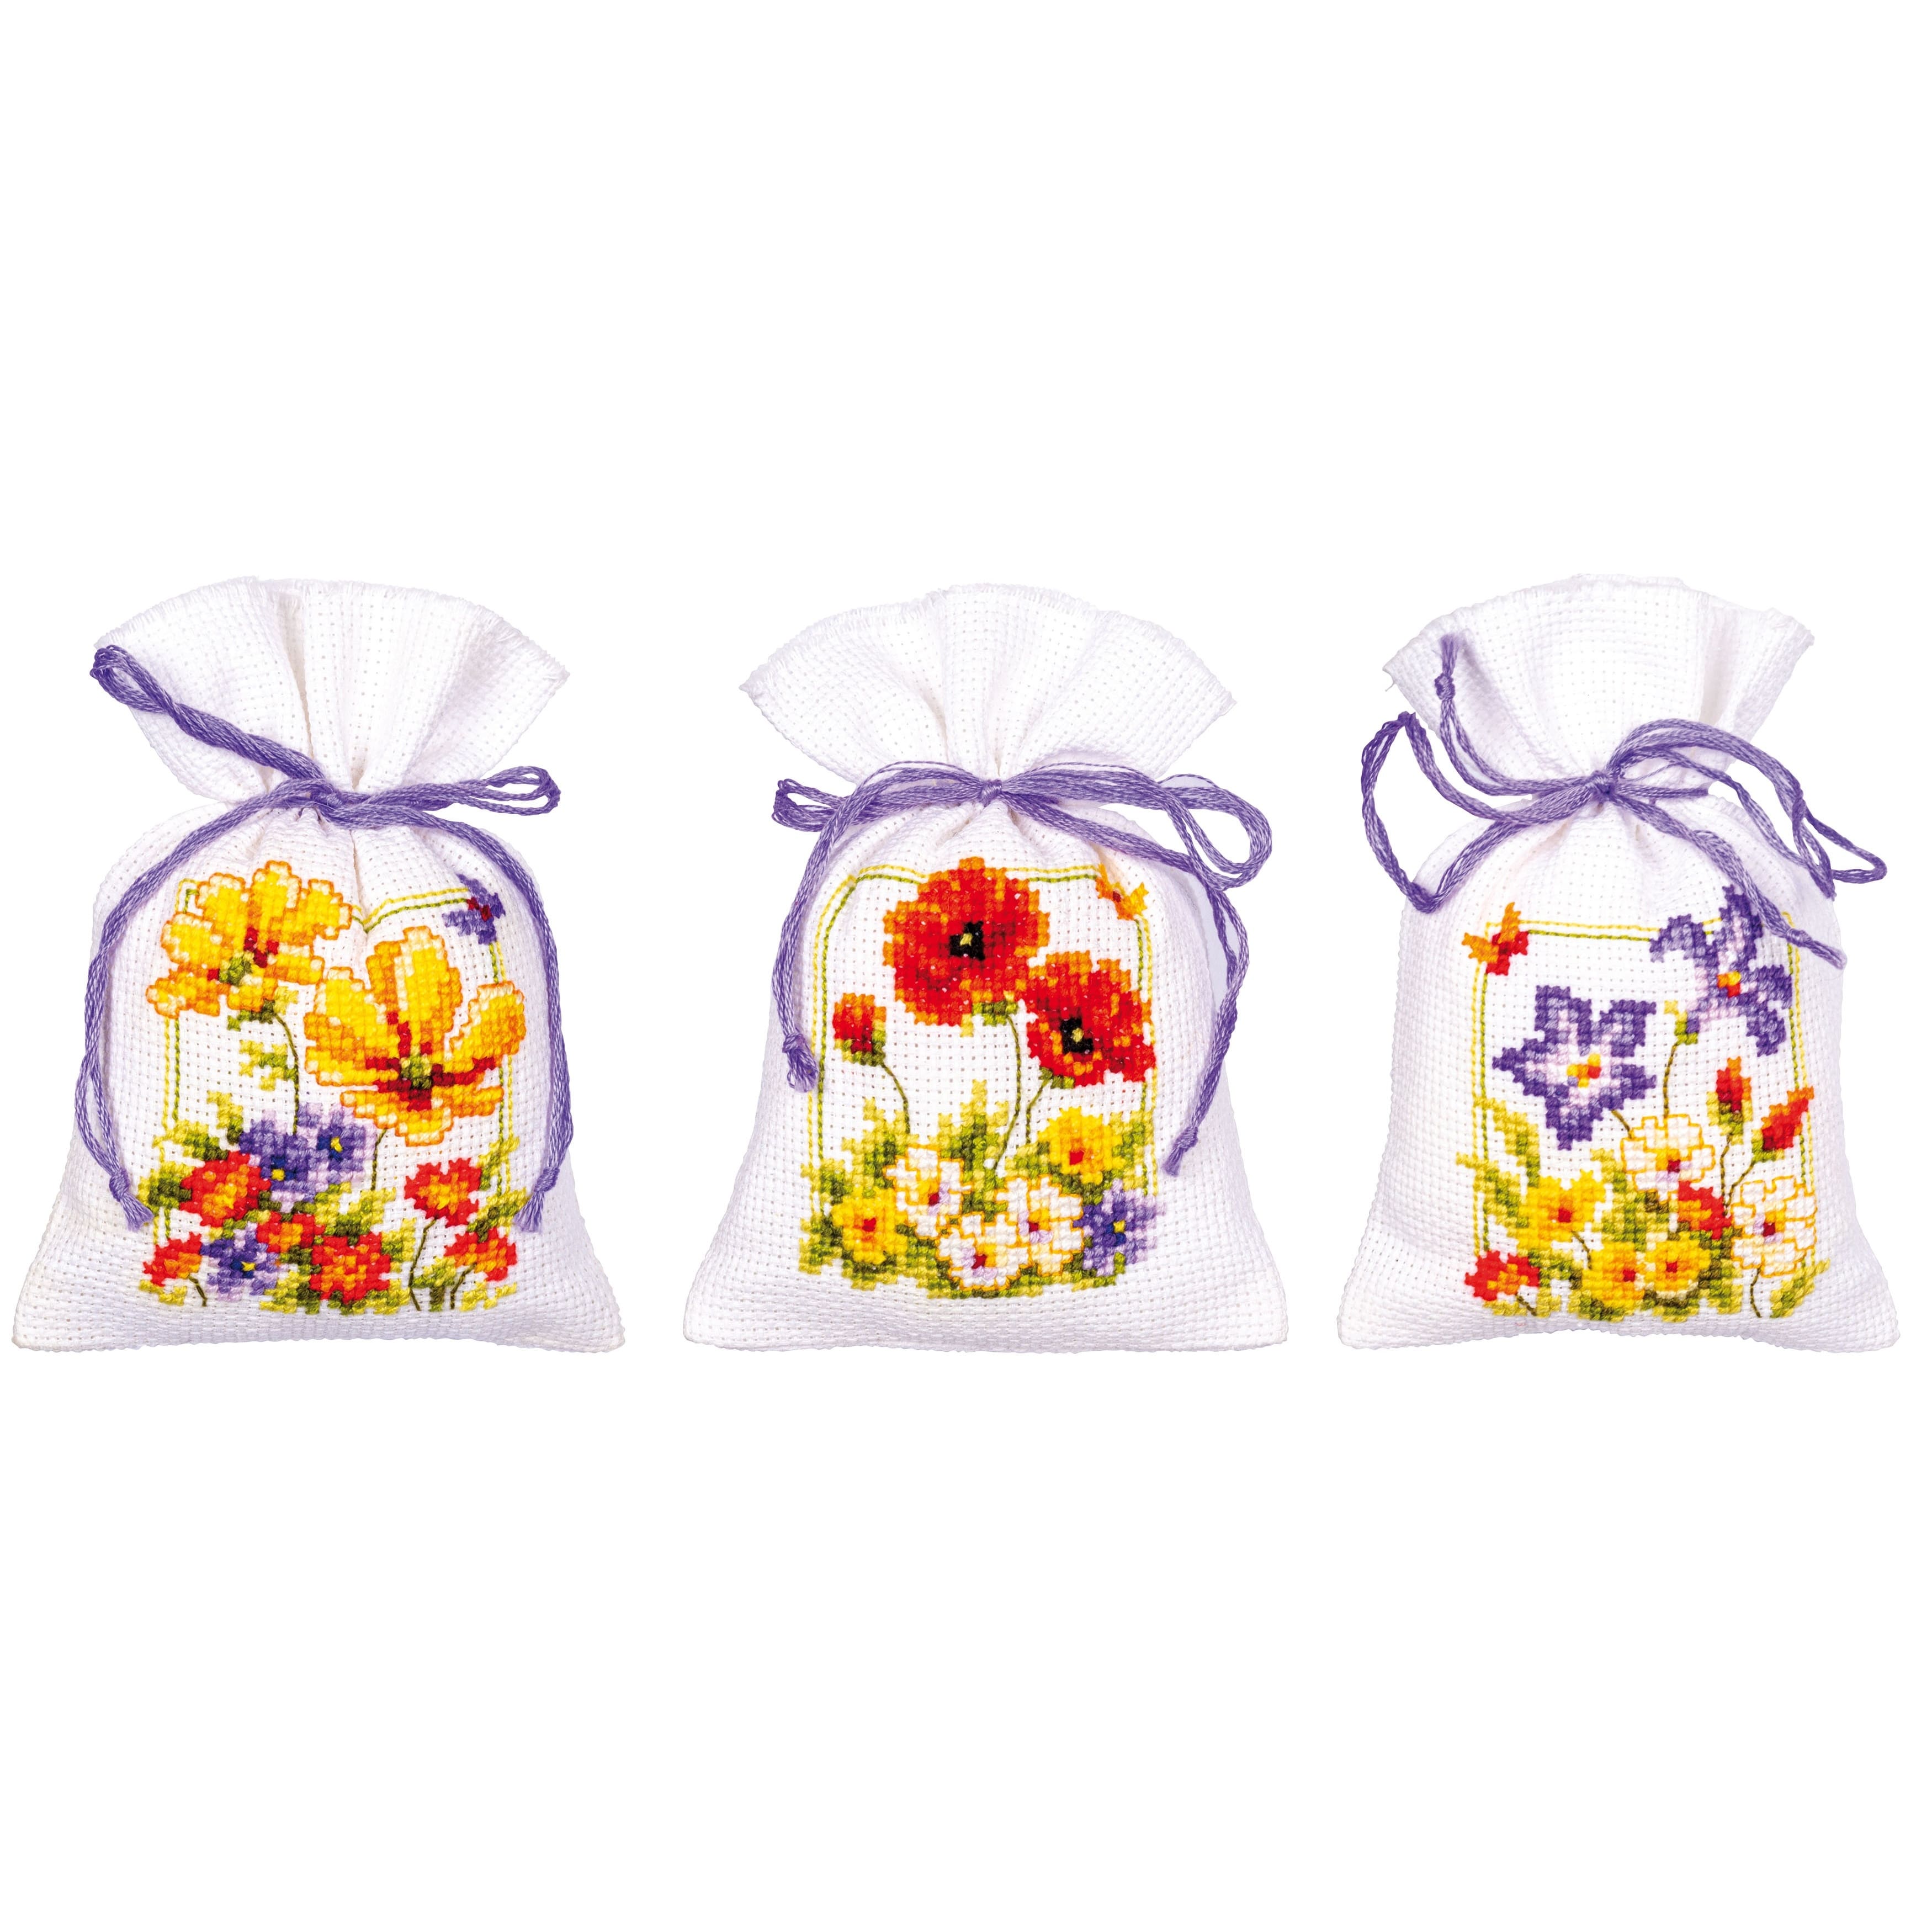 Vervaco Summer Flowers Counted Cross Stitch Sachet Bags Kit